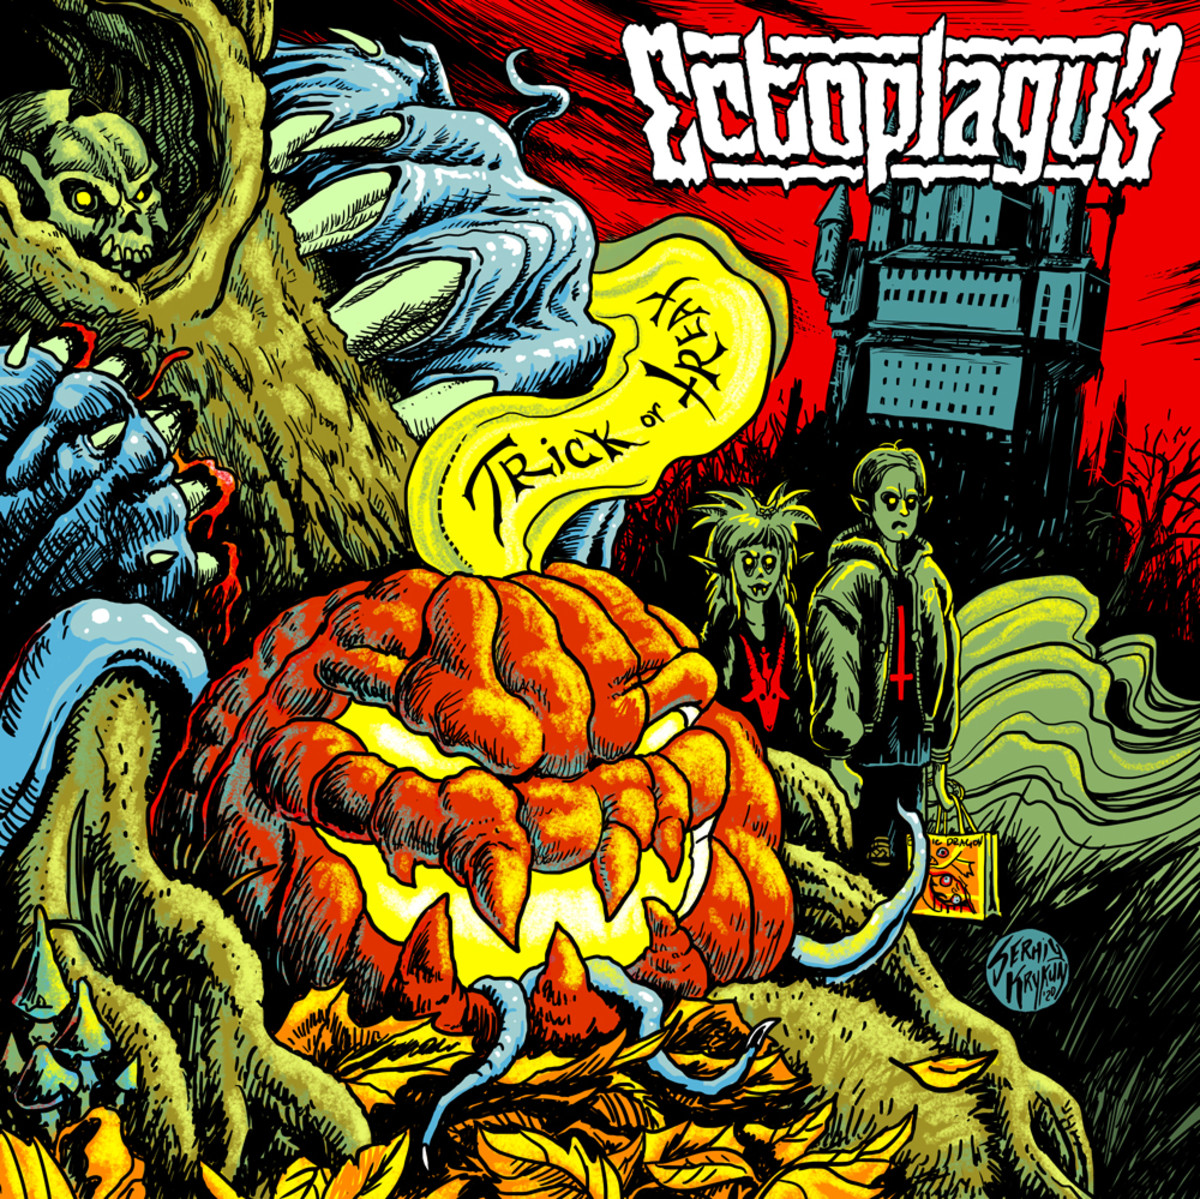 Synth Album Review: "Trick or Treat" by Ectoplague